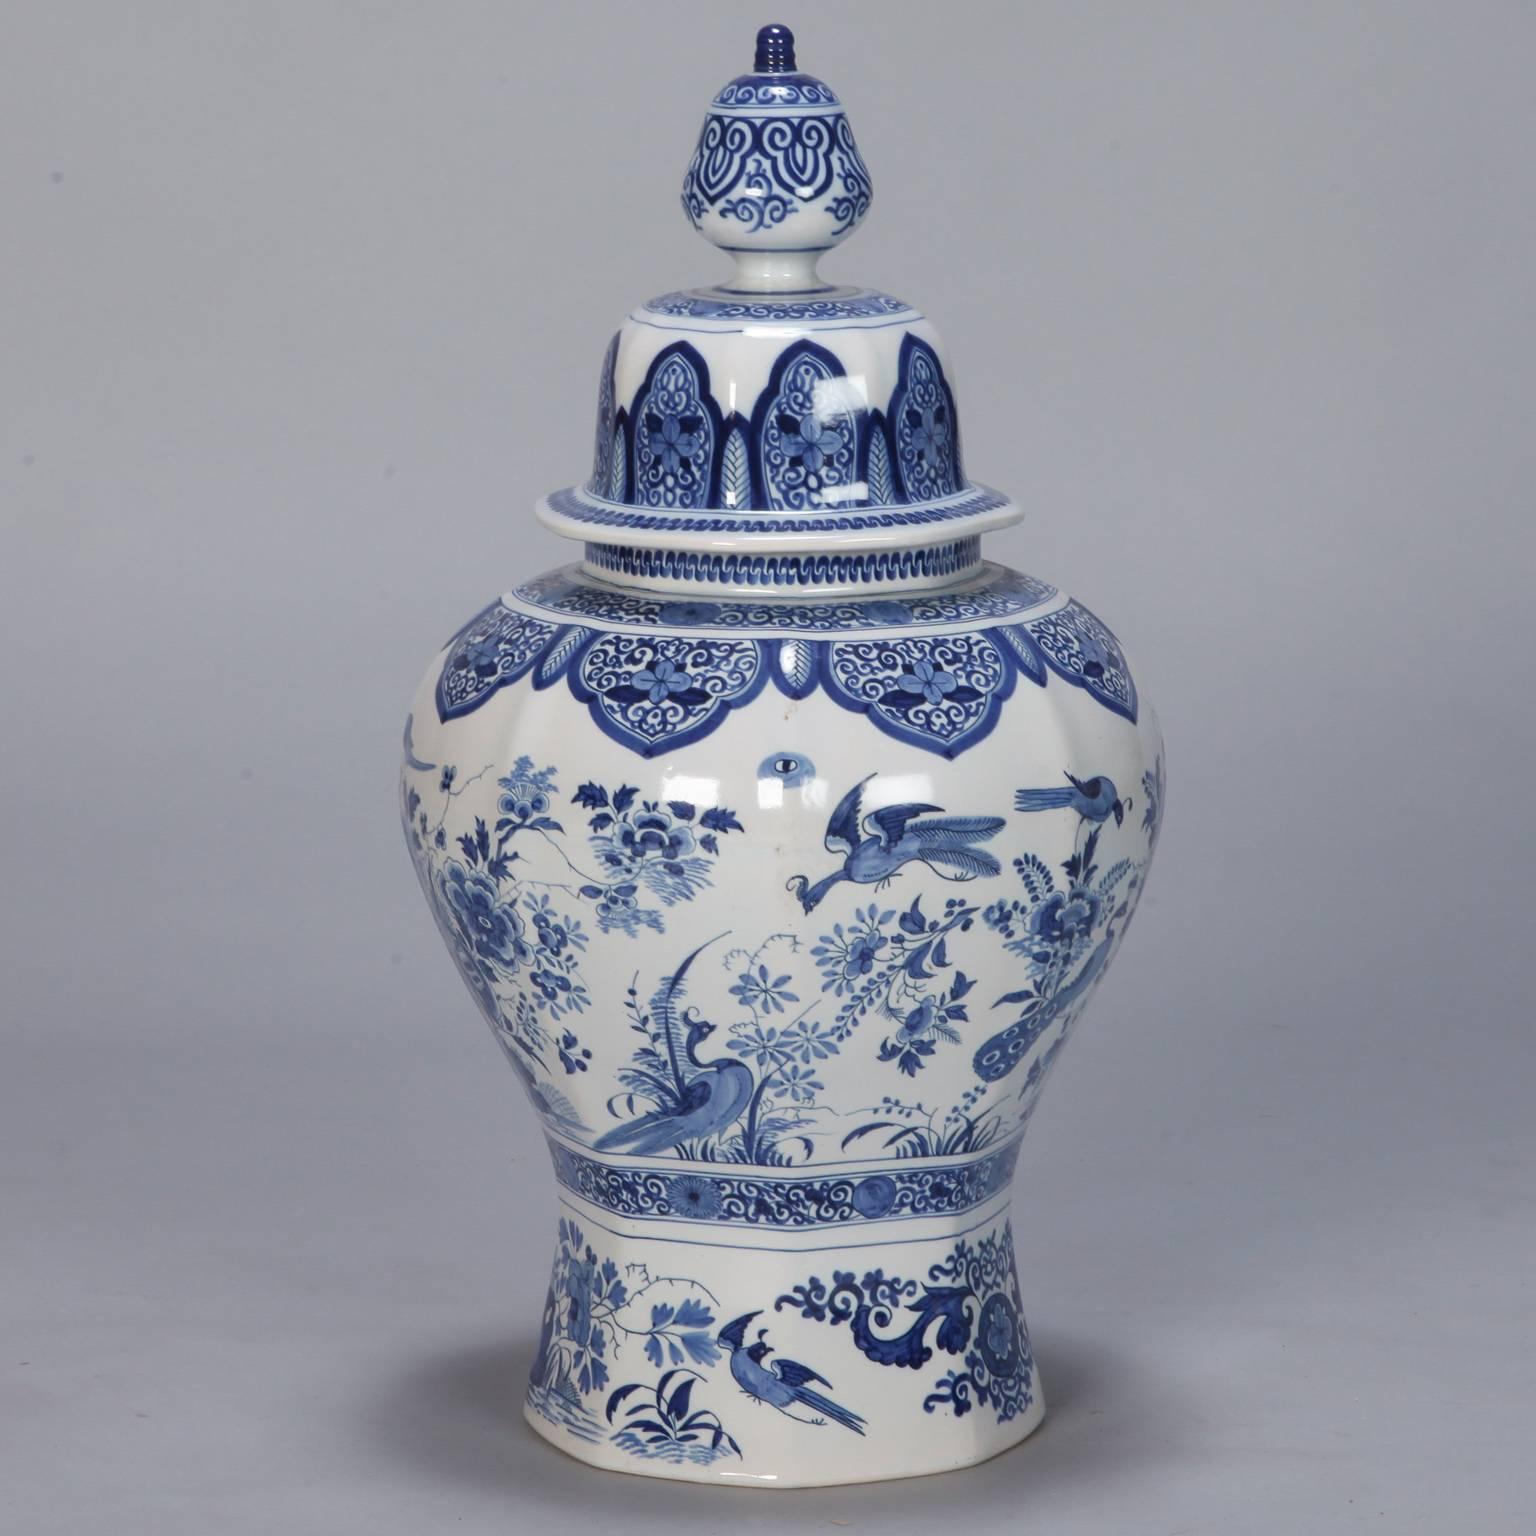 Large early 20th century Dutch vase in Classic blue and white glaze depicts peacocks, flowers, butterflies and decorative borders at the neck and lid. Body of vessel is subtly paneled and with the lid in place, this piece is two feet tall.
 